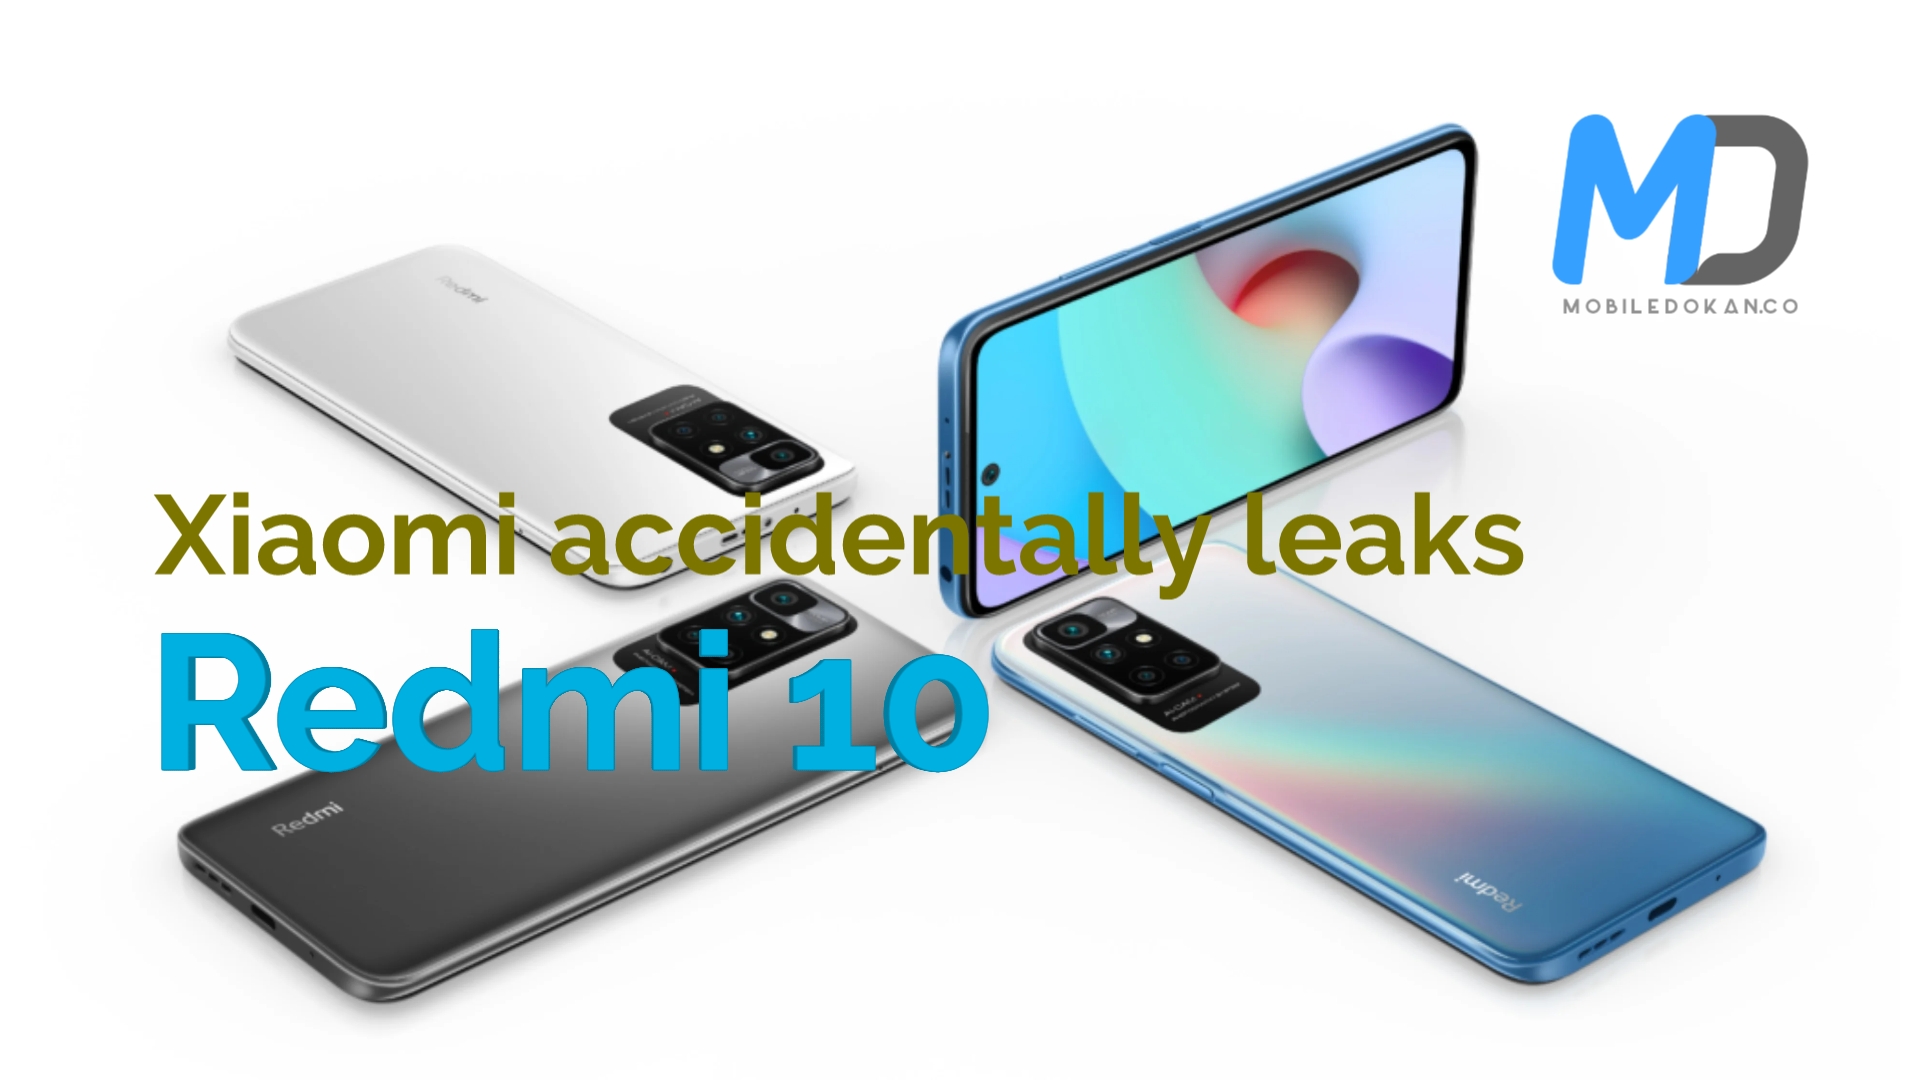 Xiaomi accidentally leaks everything about the Redmi 10